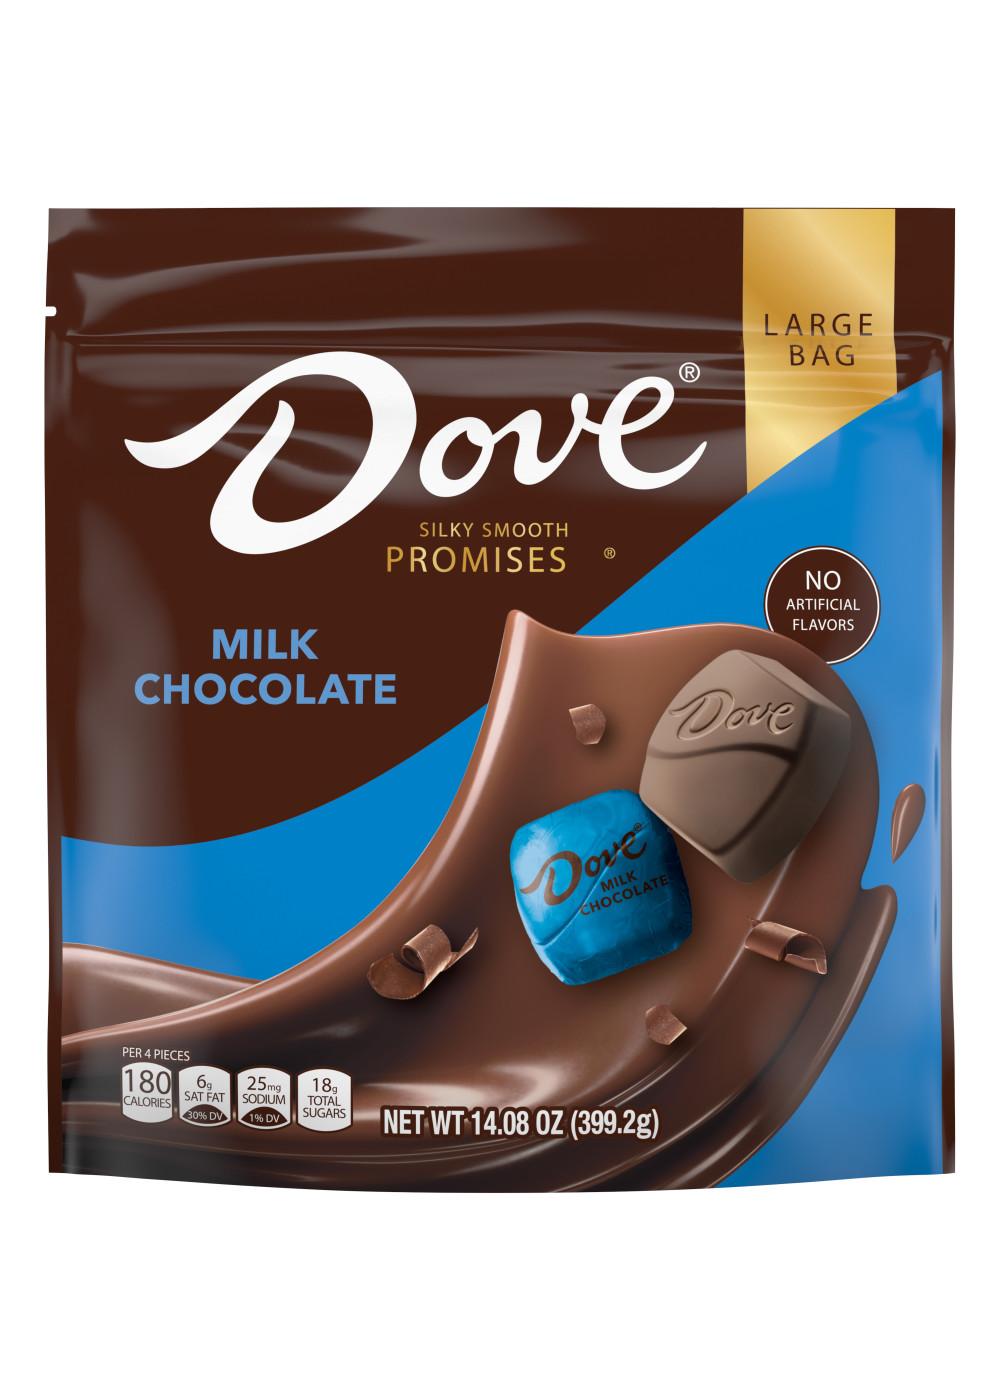 Dove Promises Milk Chocolate Candy - Large Bag; image 1 of 7